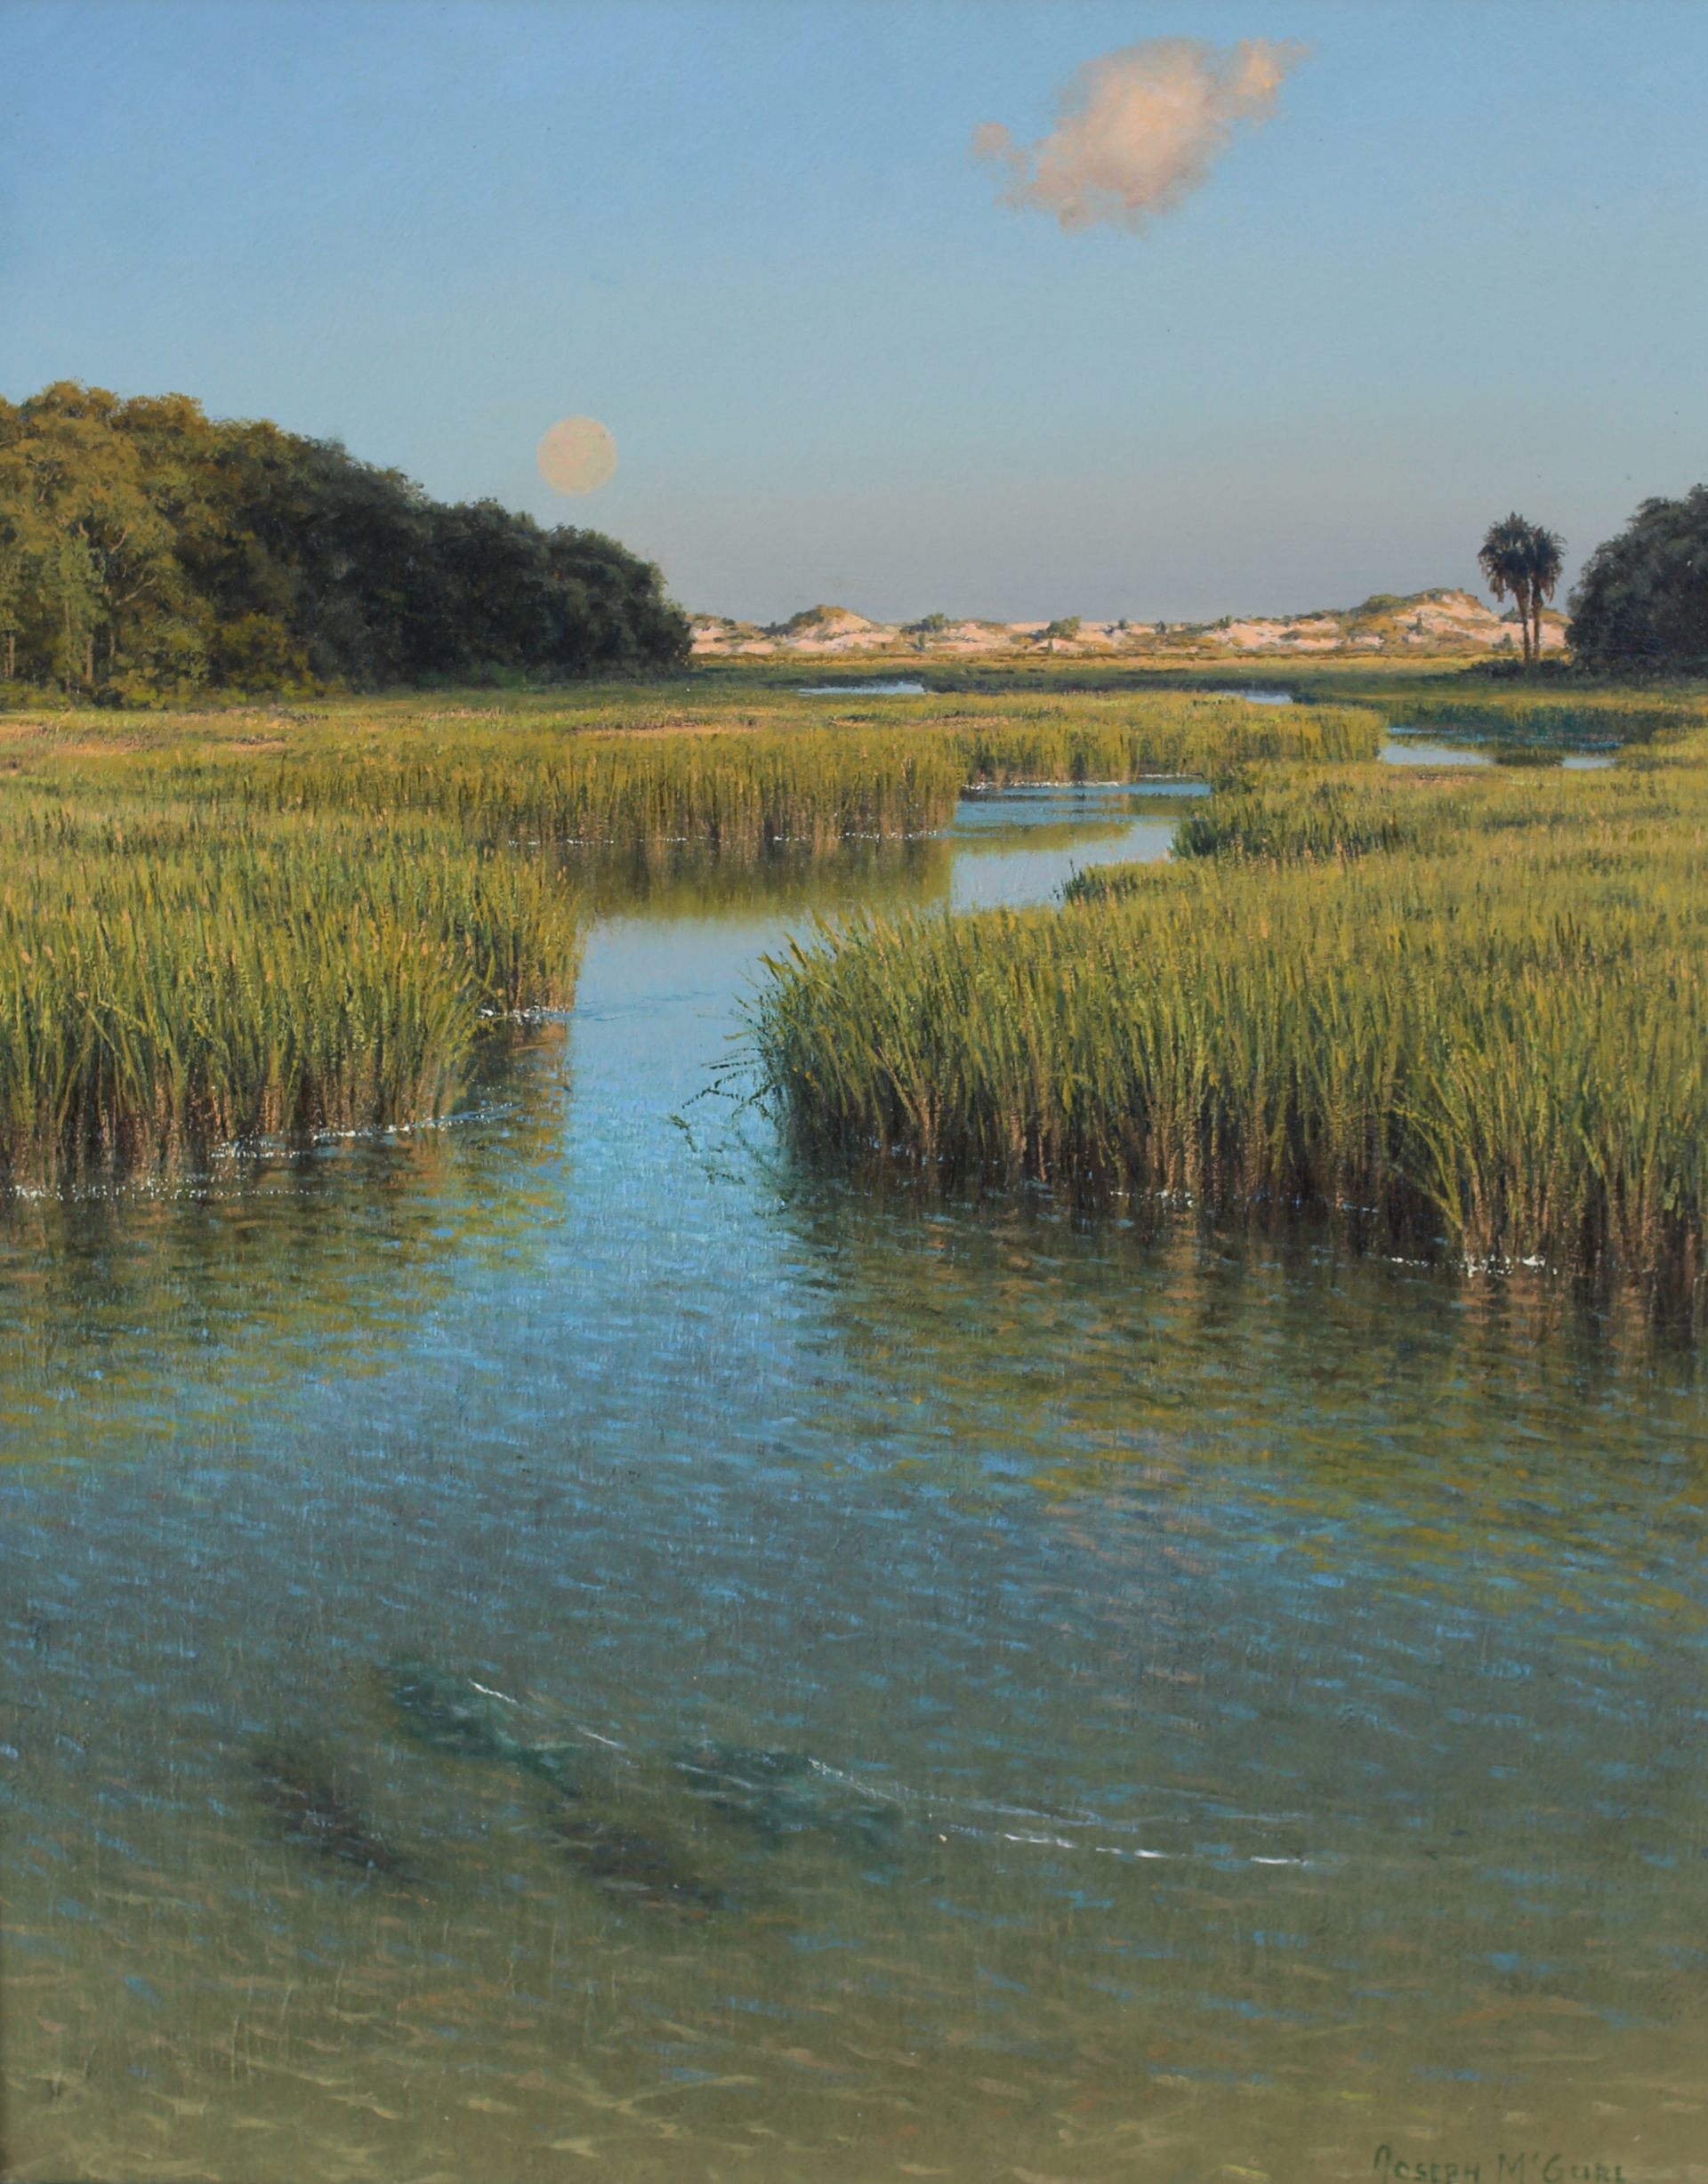 Moonrise in Afternoon Light (The Florida Waterways Series) by Joseph McGurl